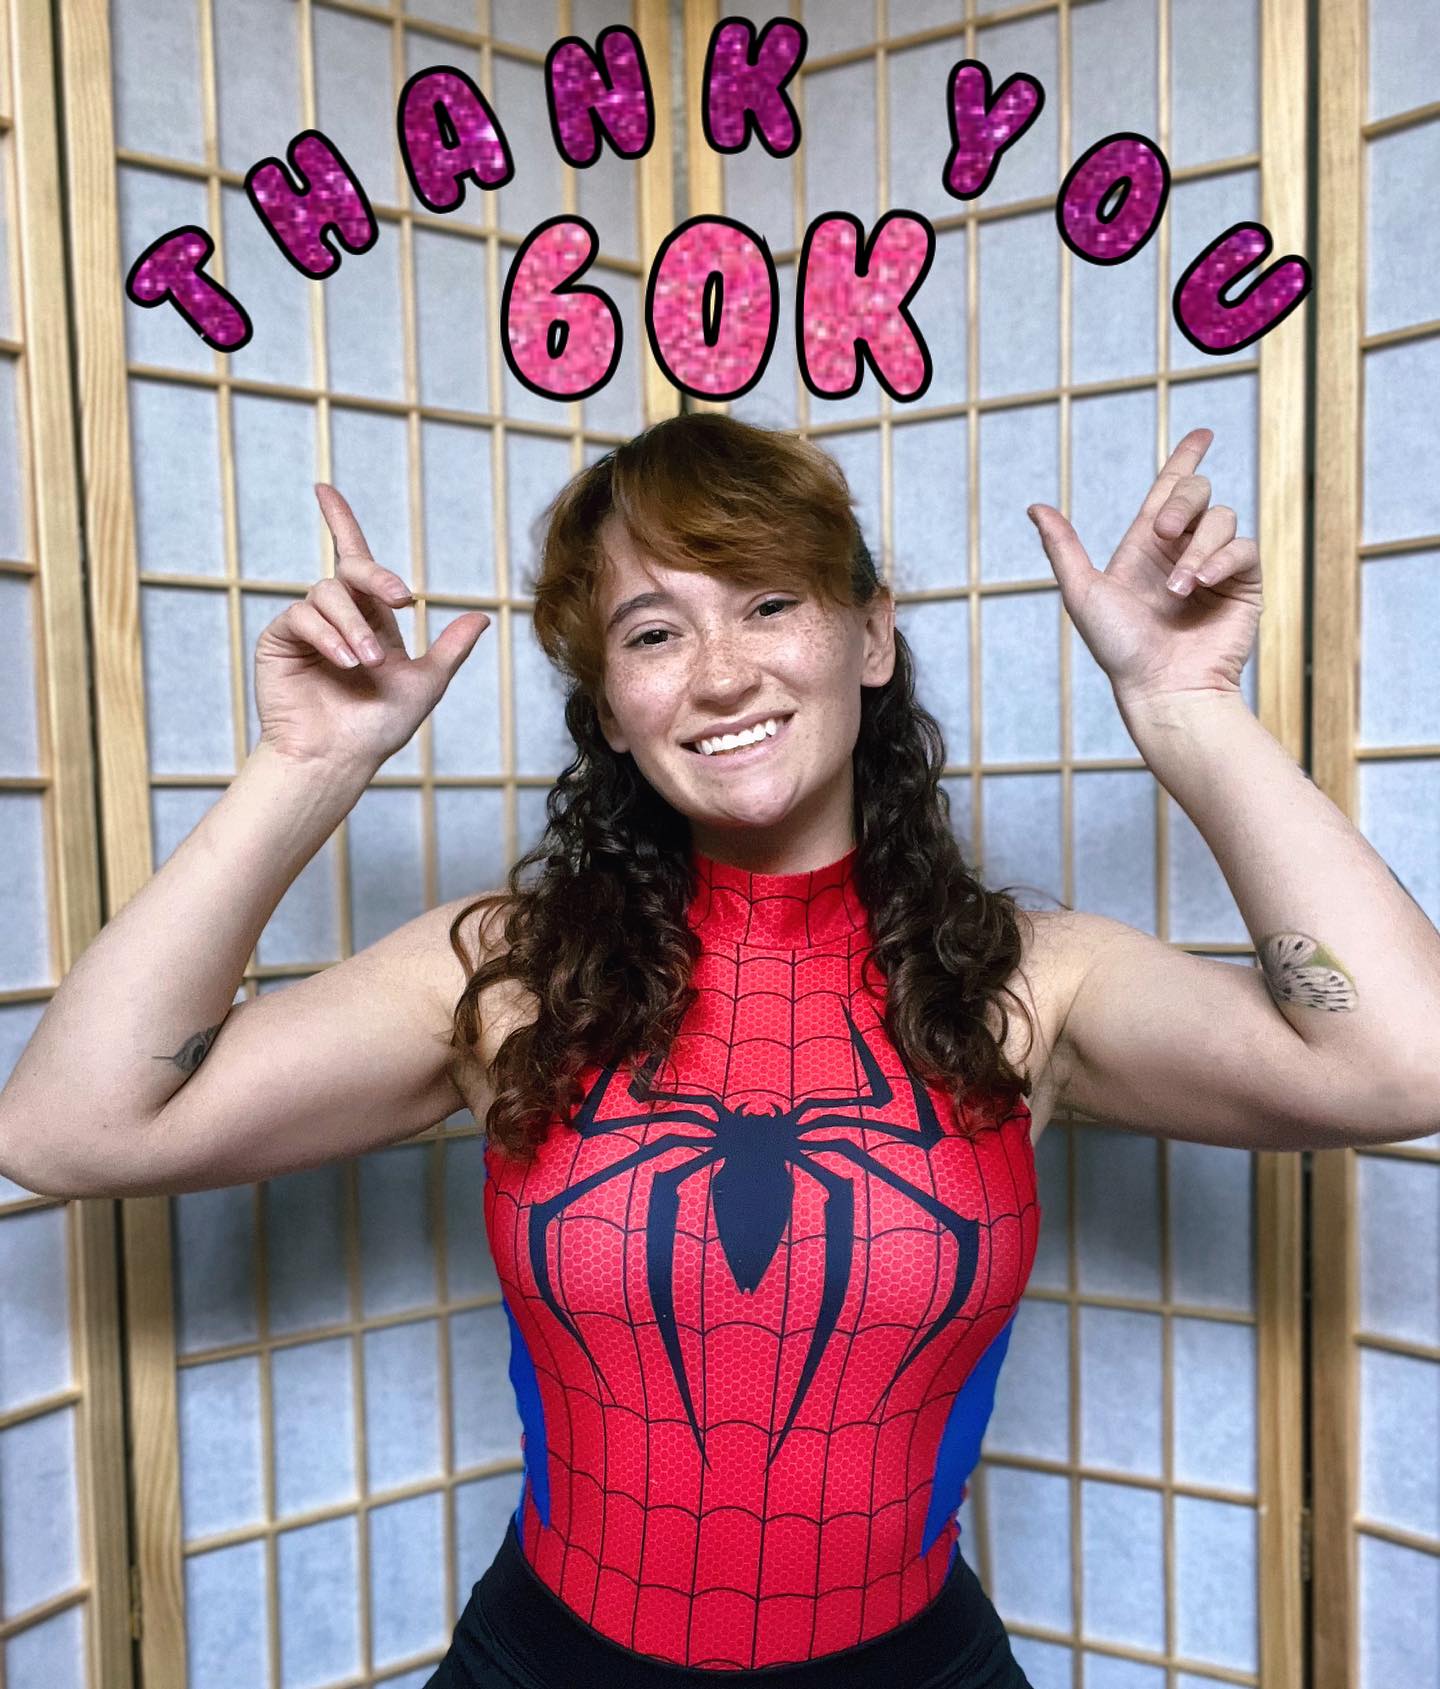 WHHOA 60k?!
Thank you guys sososoo much, I appreciate you all being here & supporting me, my spookiness, gooberishness & creativity! 
.
Here’s to many more adventures & shenanigans to come, thank you all again!🥰
.
#60k #thankyou #appreciation #appreciationpost